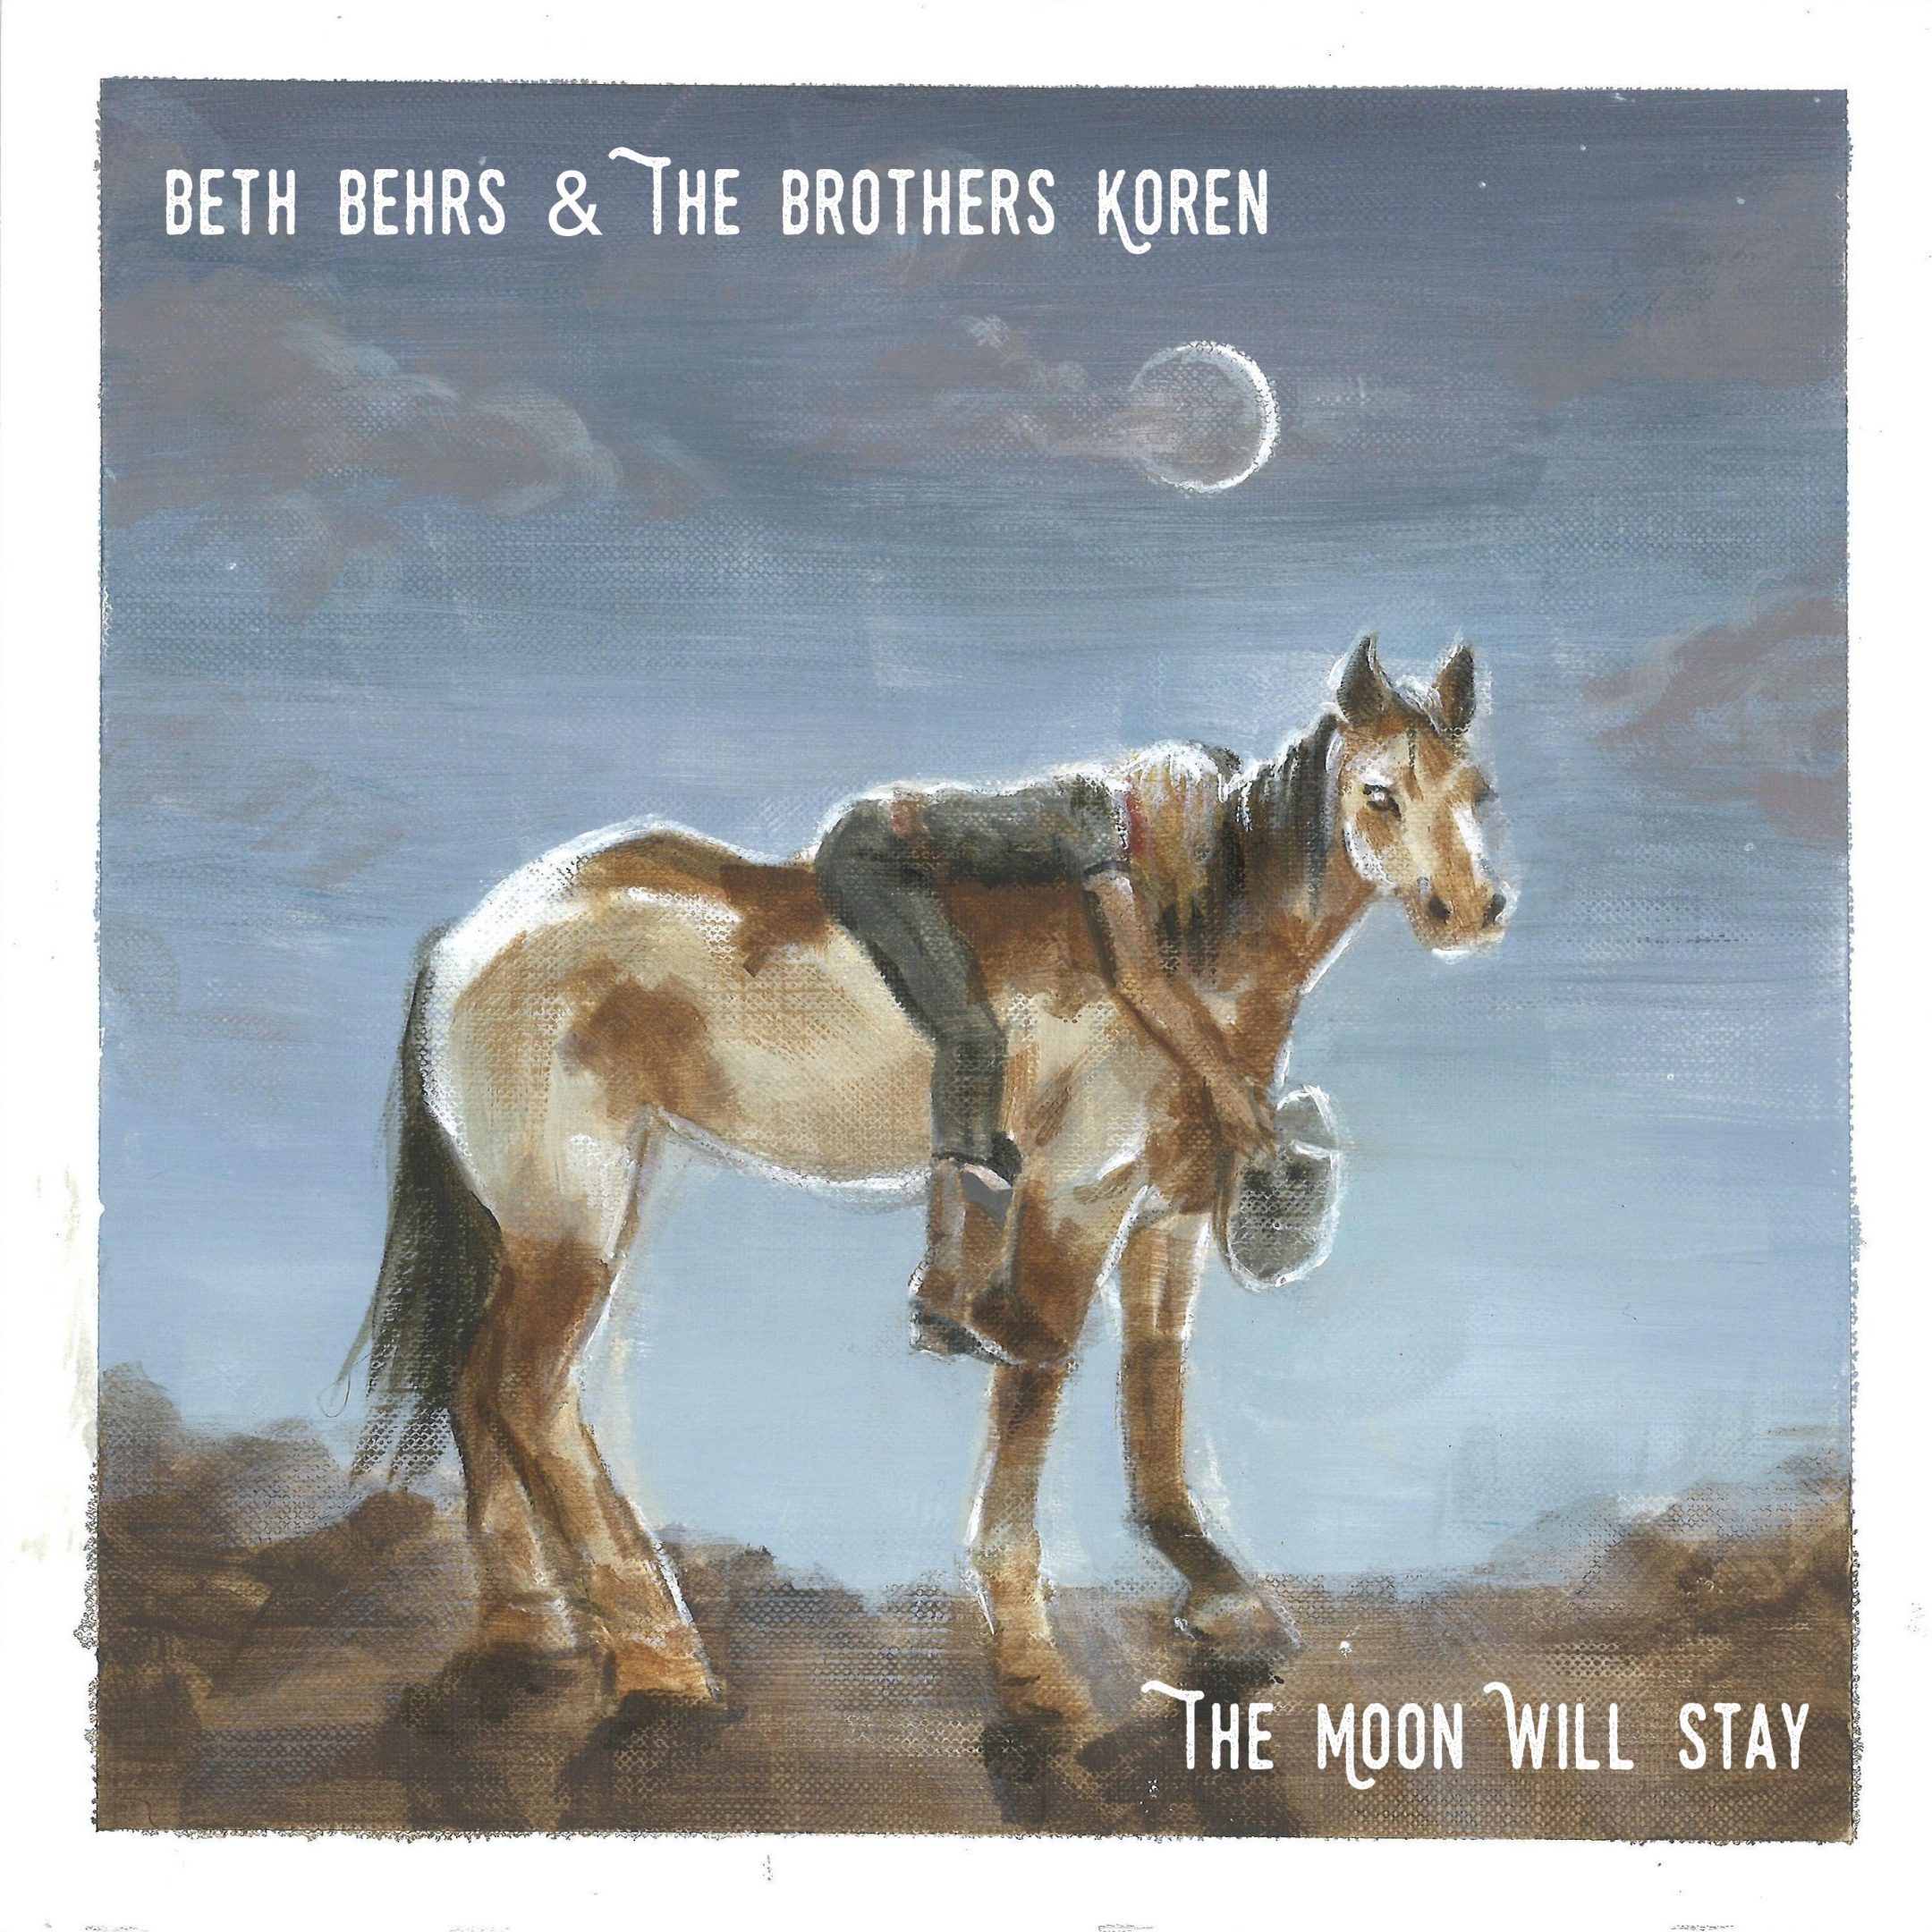 Harmonics with Beth Behrs: Beth Behrs & the Brothers Koren, 'The Moon Will Stay'